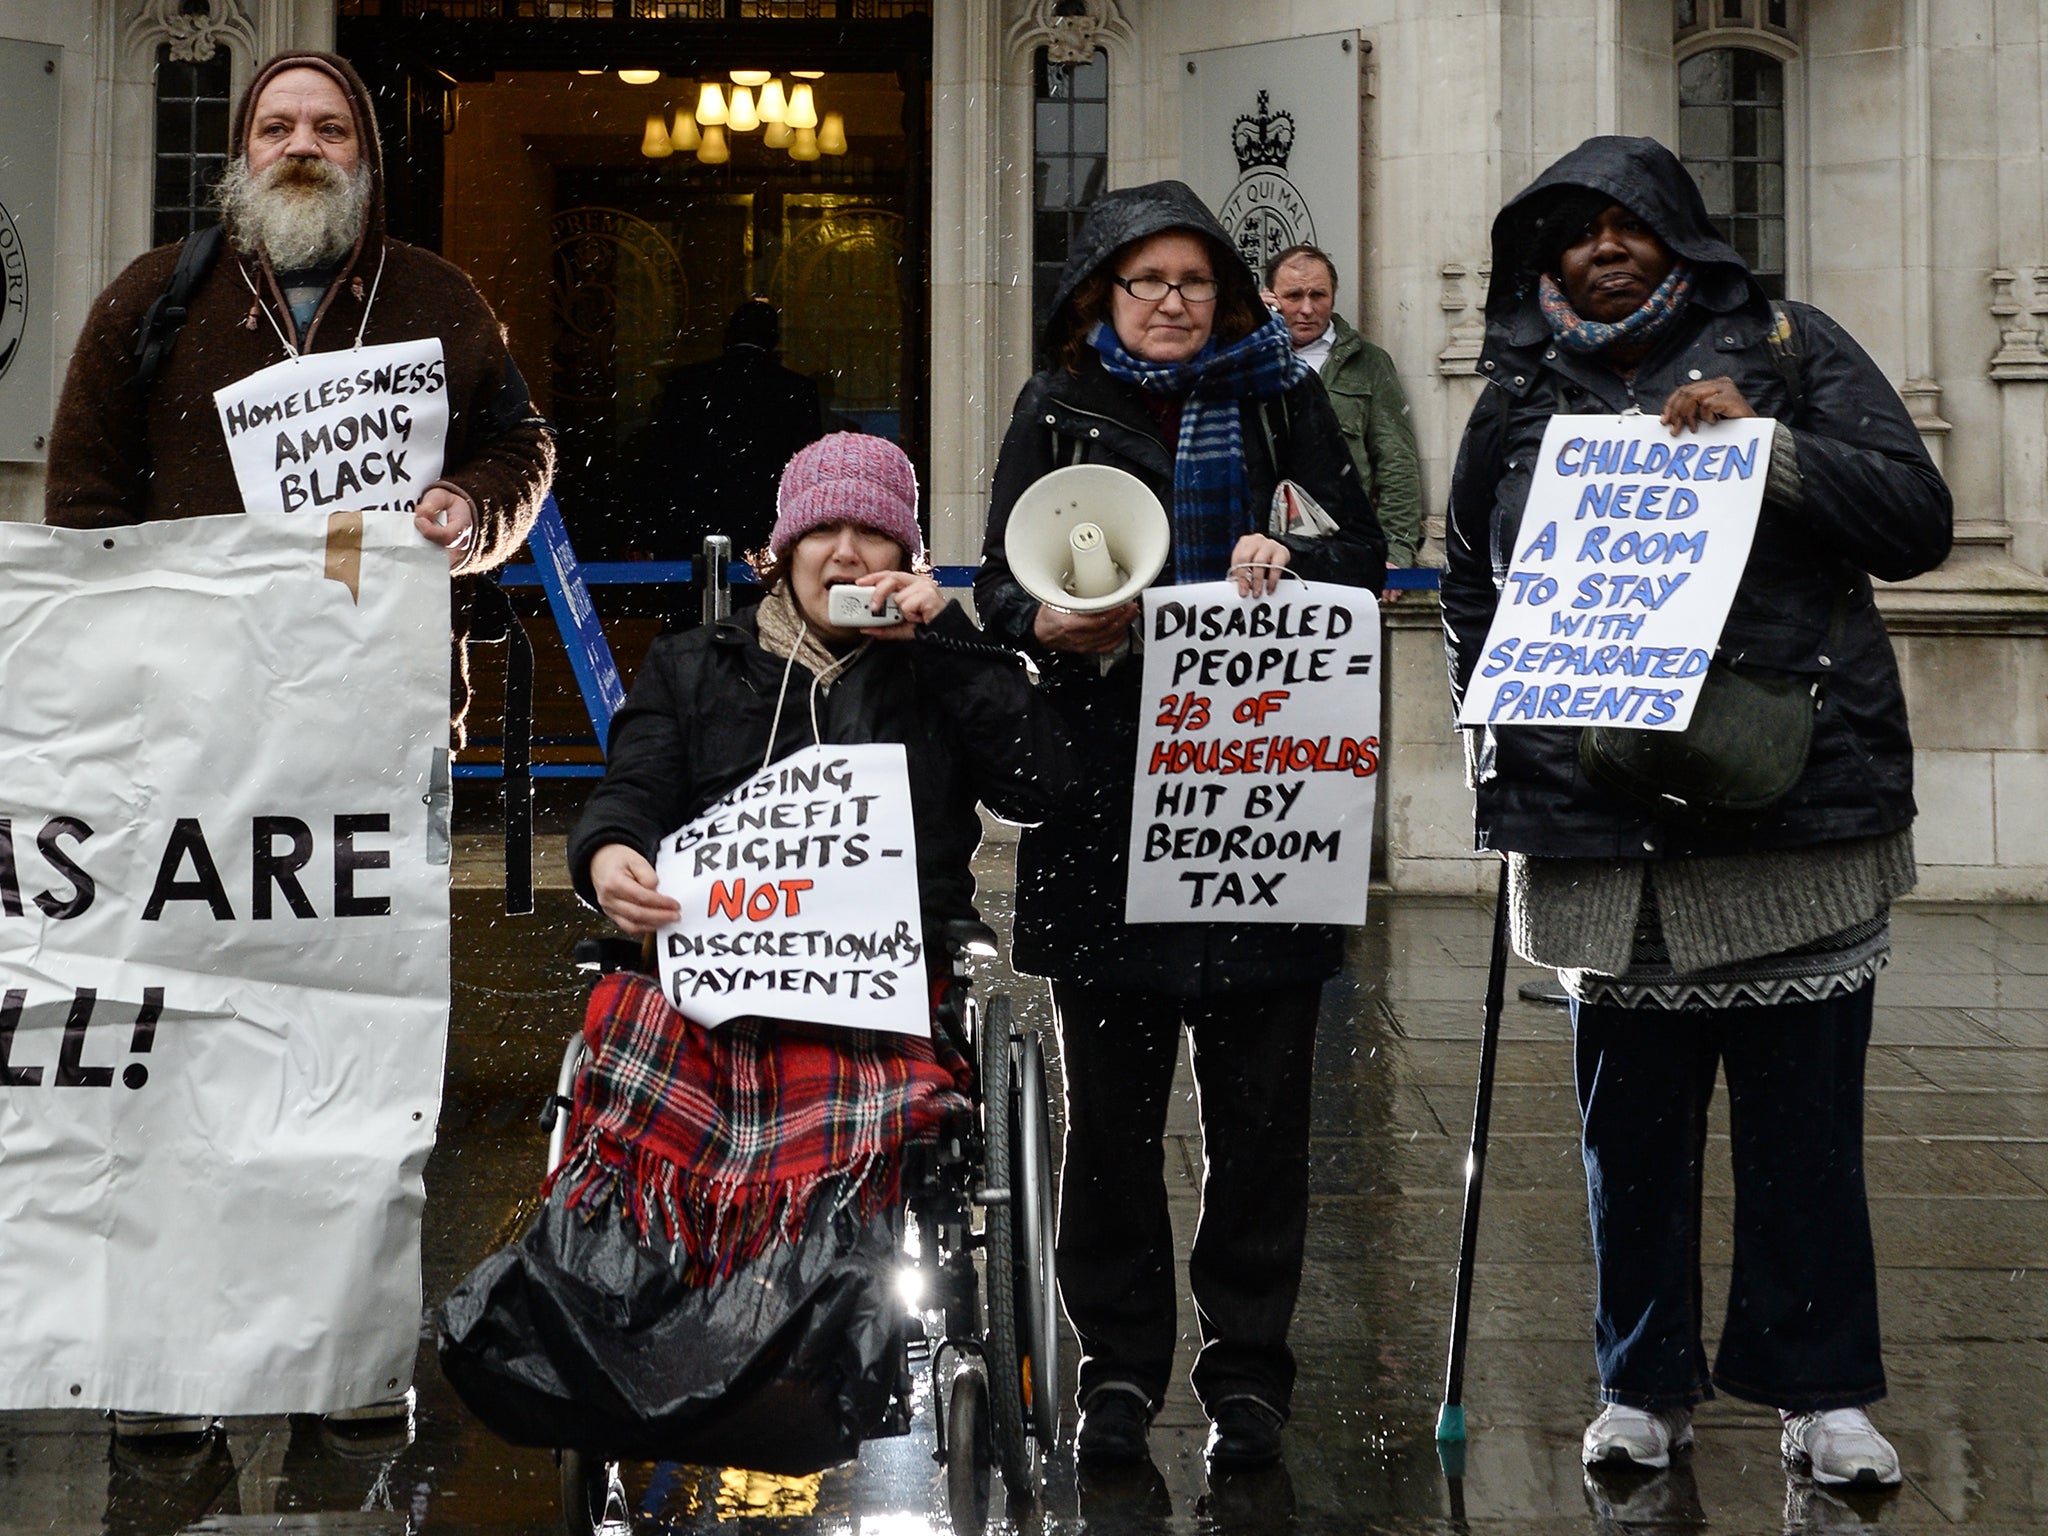 Protestors outside the Supreme Court raise their concerns about the impact of the bedroom tax on households with a disabled member